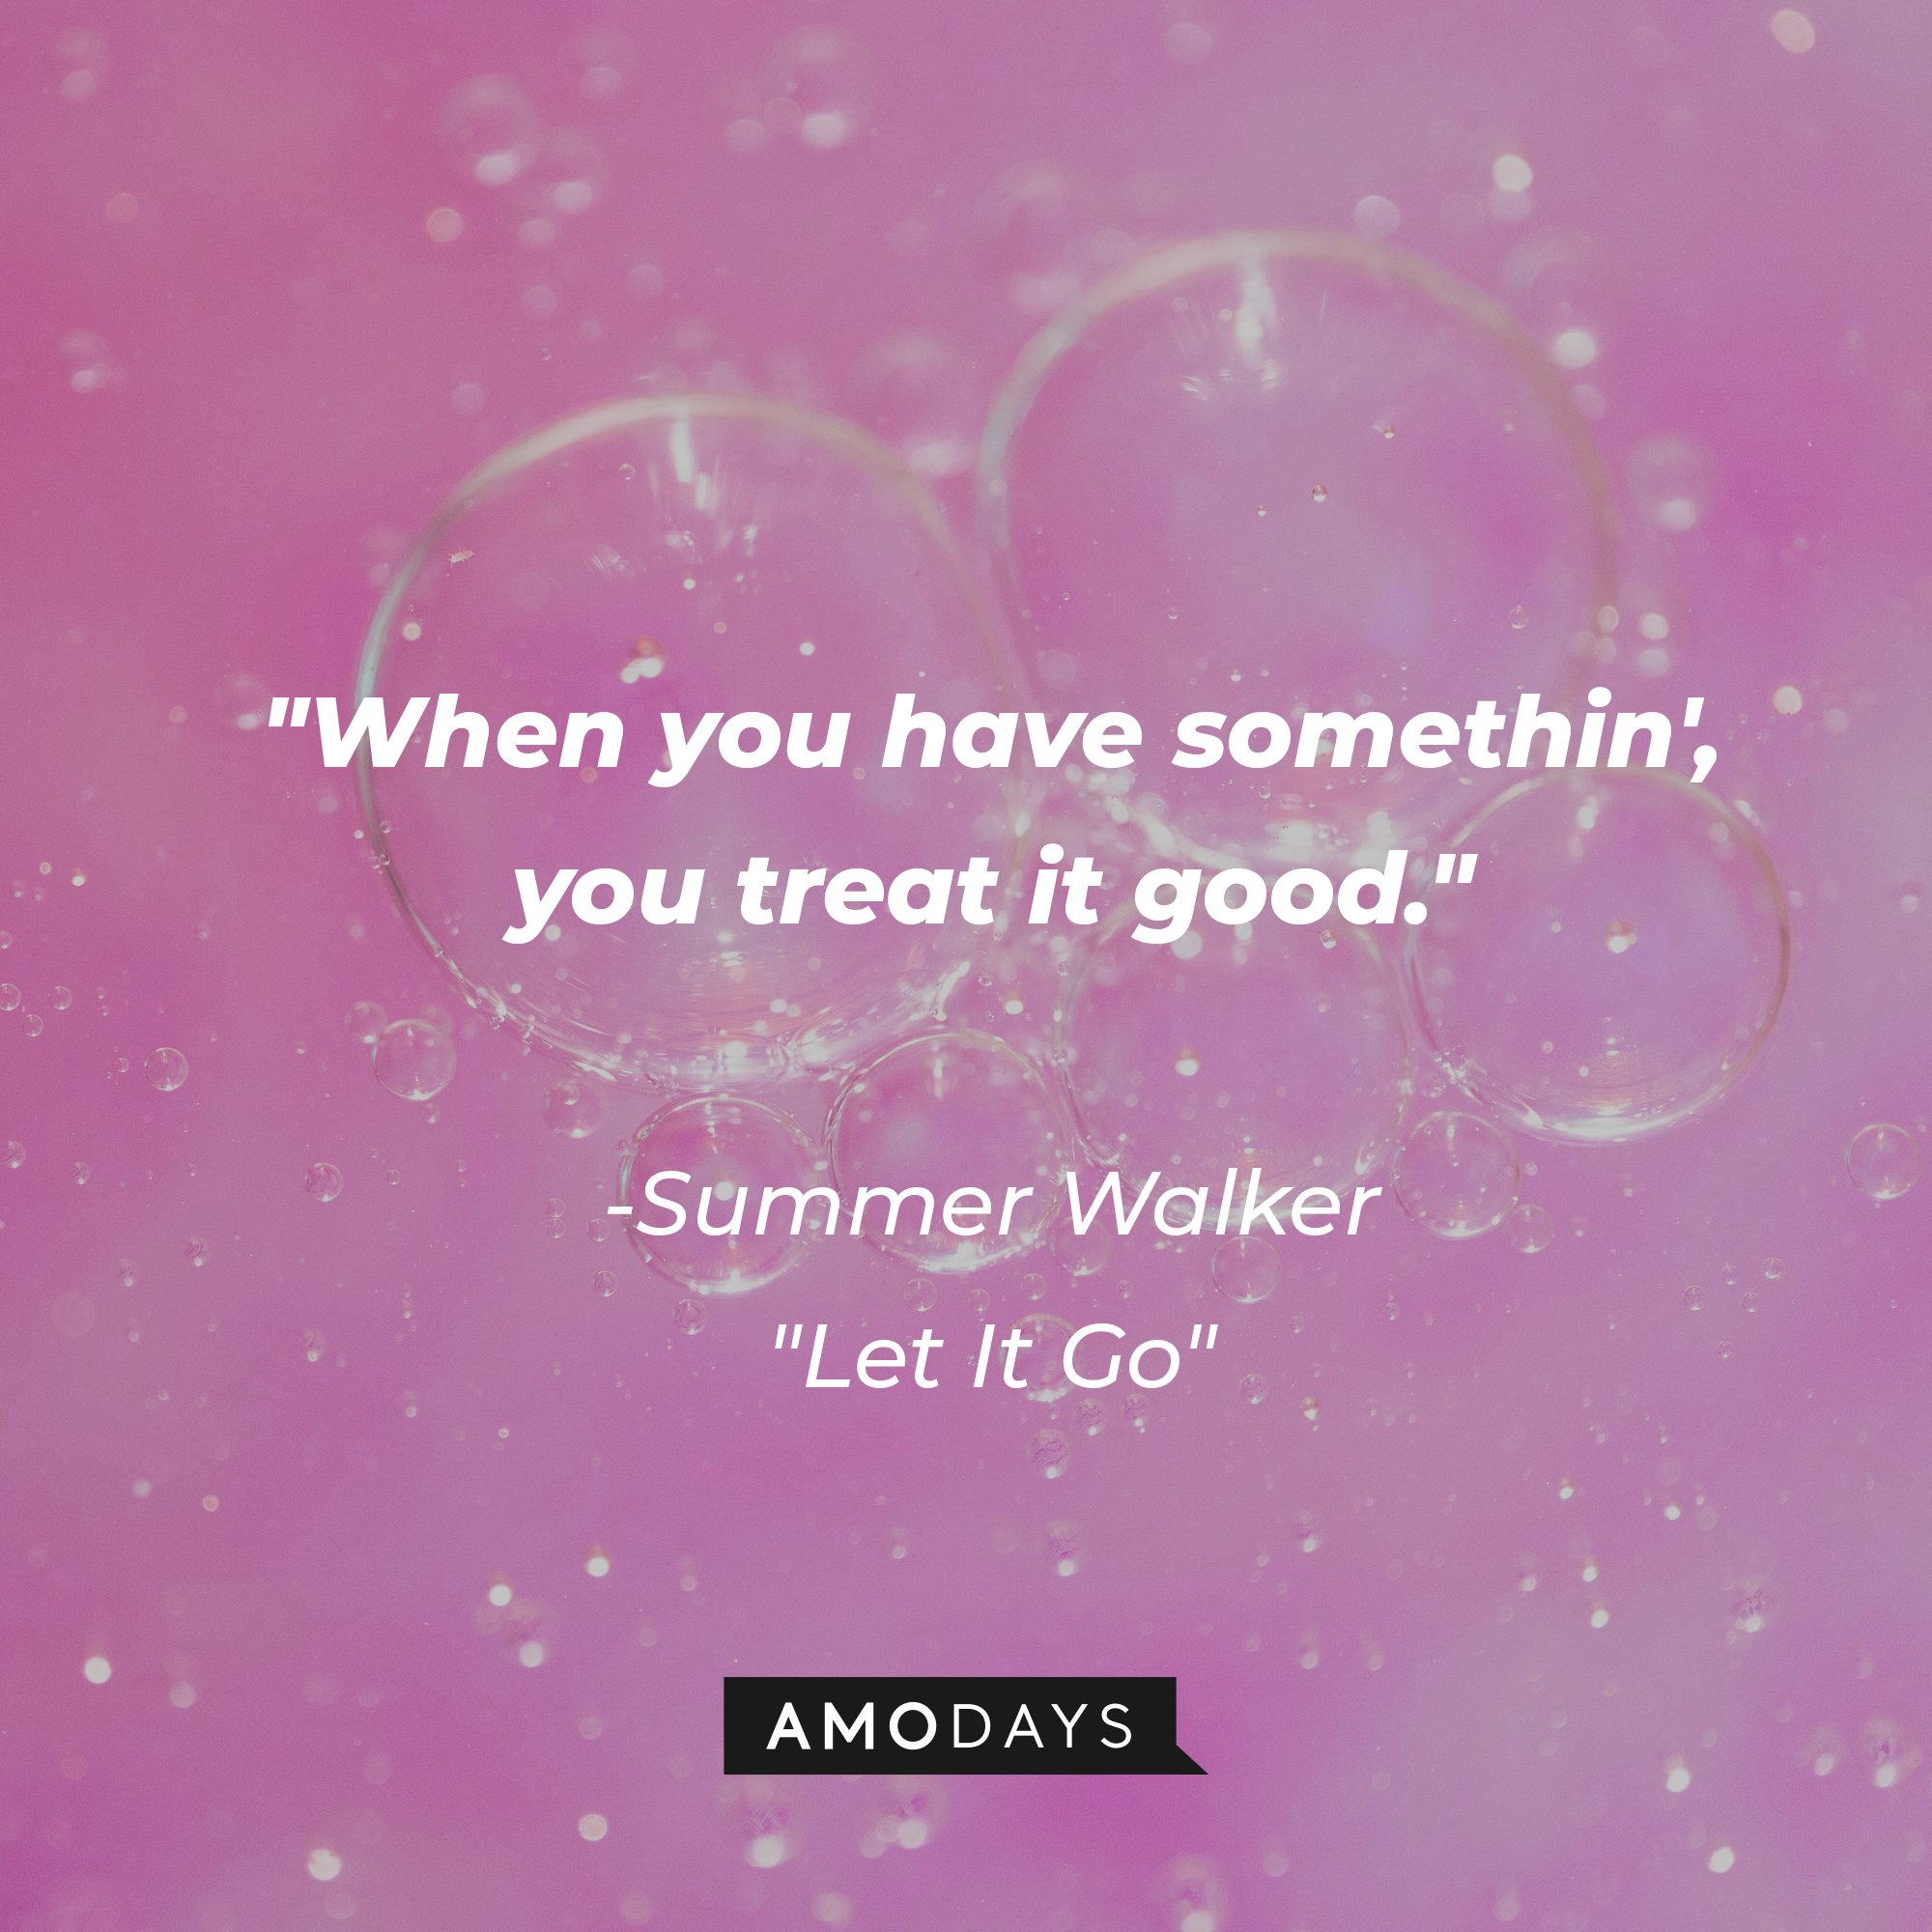 Summer Walker's "Let It Go" quote: "When you have somethin', you treat it good." | Image: AmoDays